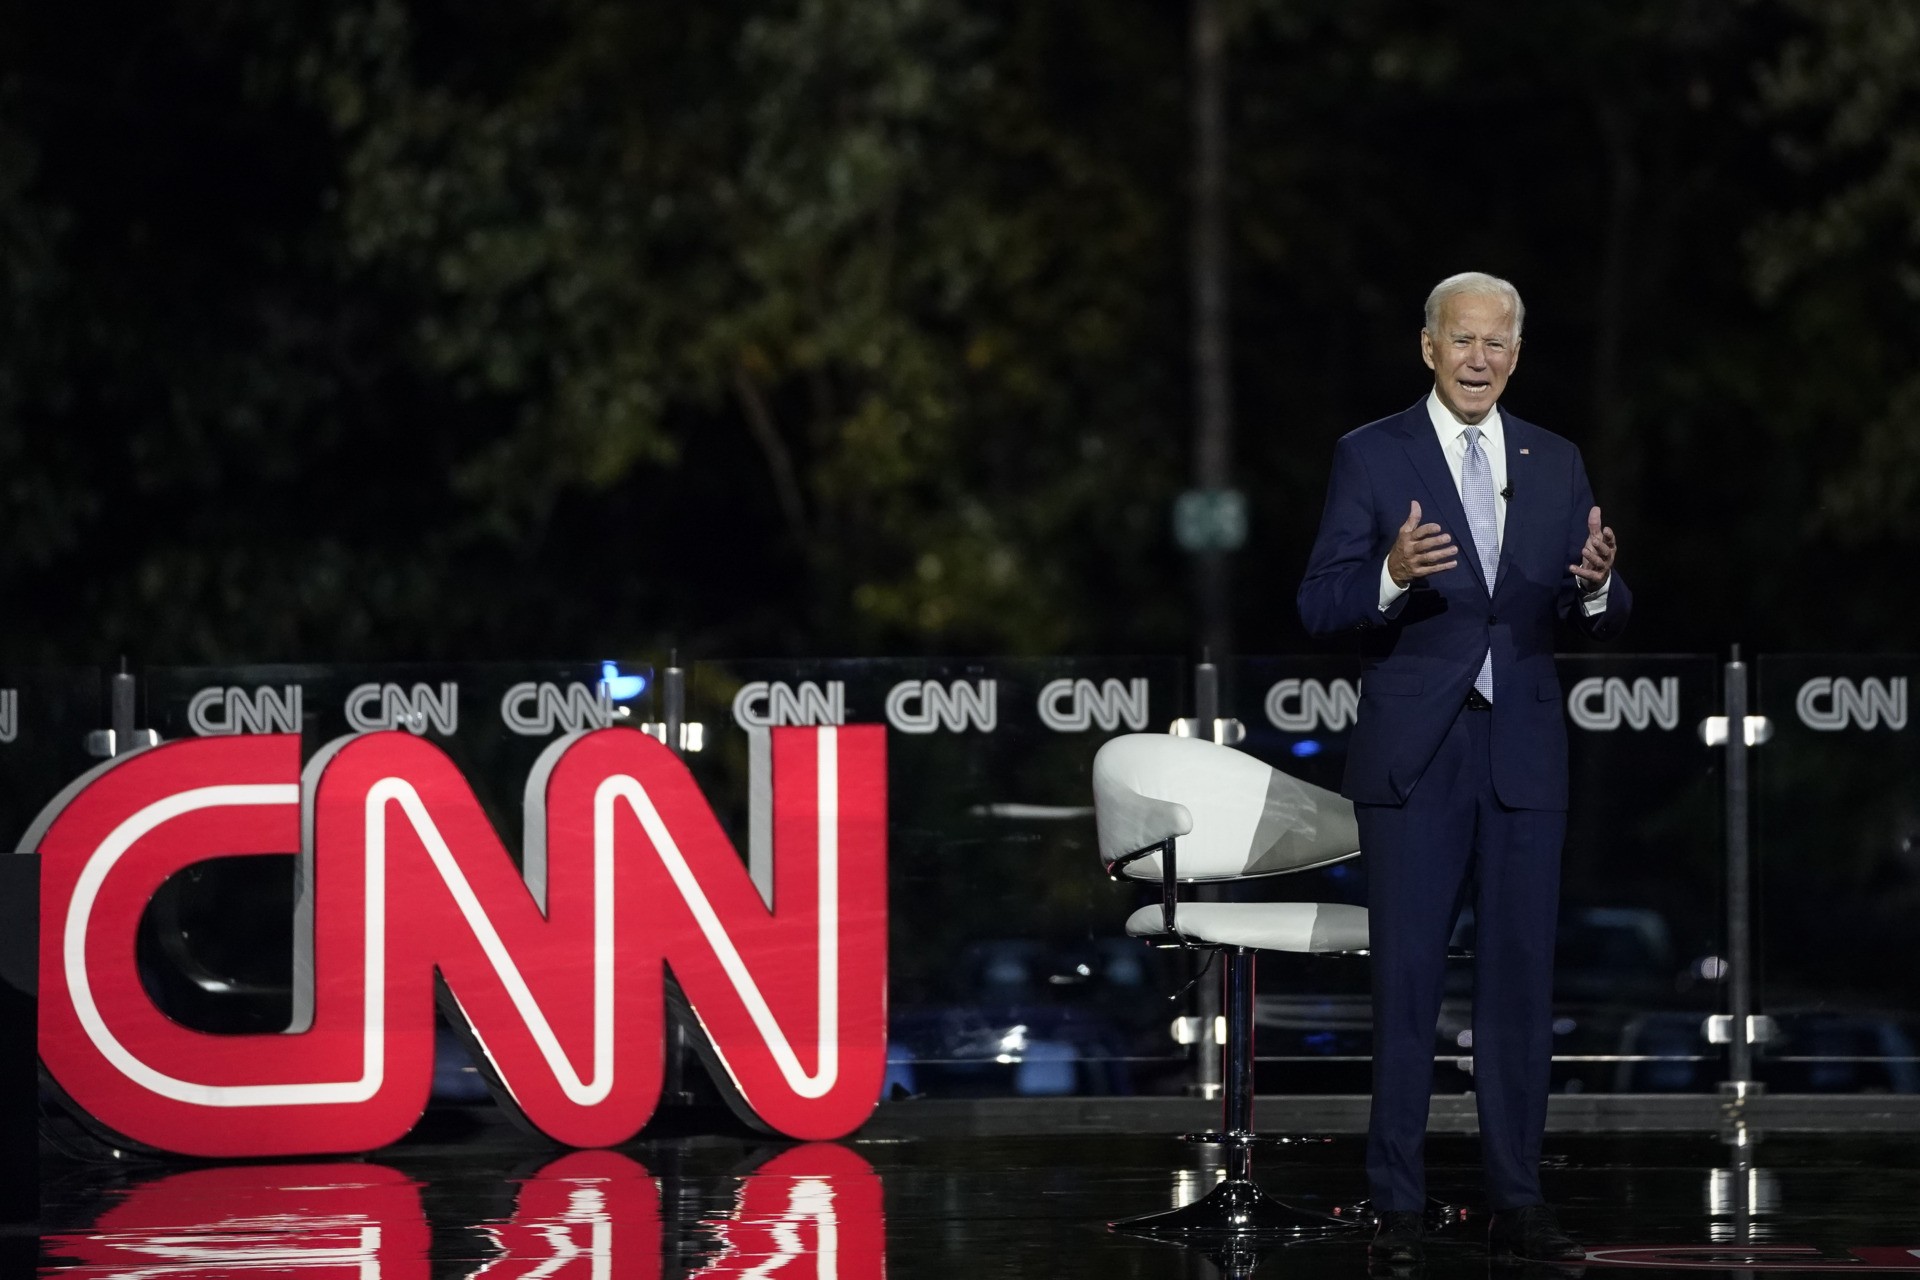 MOOSIC, PA - SEPTEMBER 17: Democratic presidential nominee and former Vice President Joe Biden participates in a CNN town hall event on September 17, 2020 in Moosic, Pennsylvania. Due to the coronavirus, the event is being held outside with audience members in their cars. Biden grew up nearby in Scranton, Pennsylvania. (Photo by Drew Angerer/Getty Images)